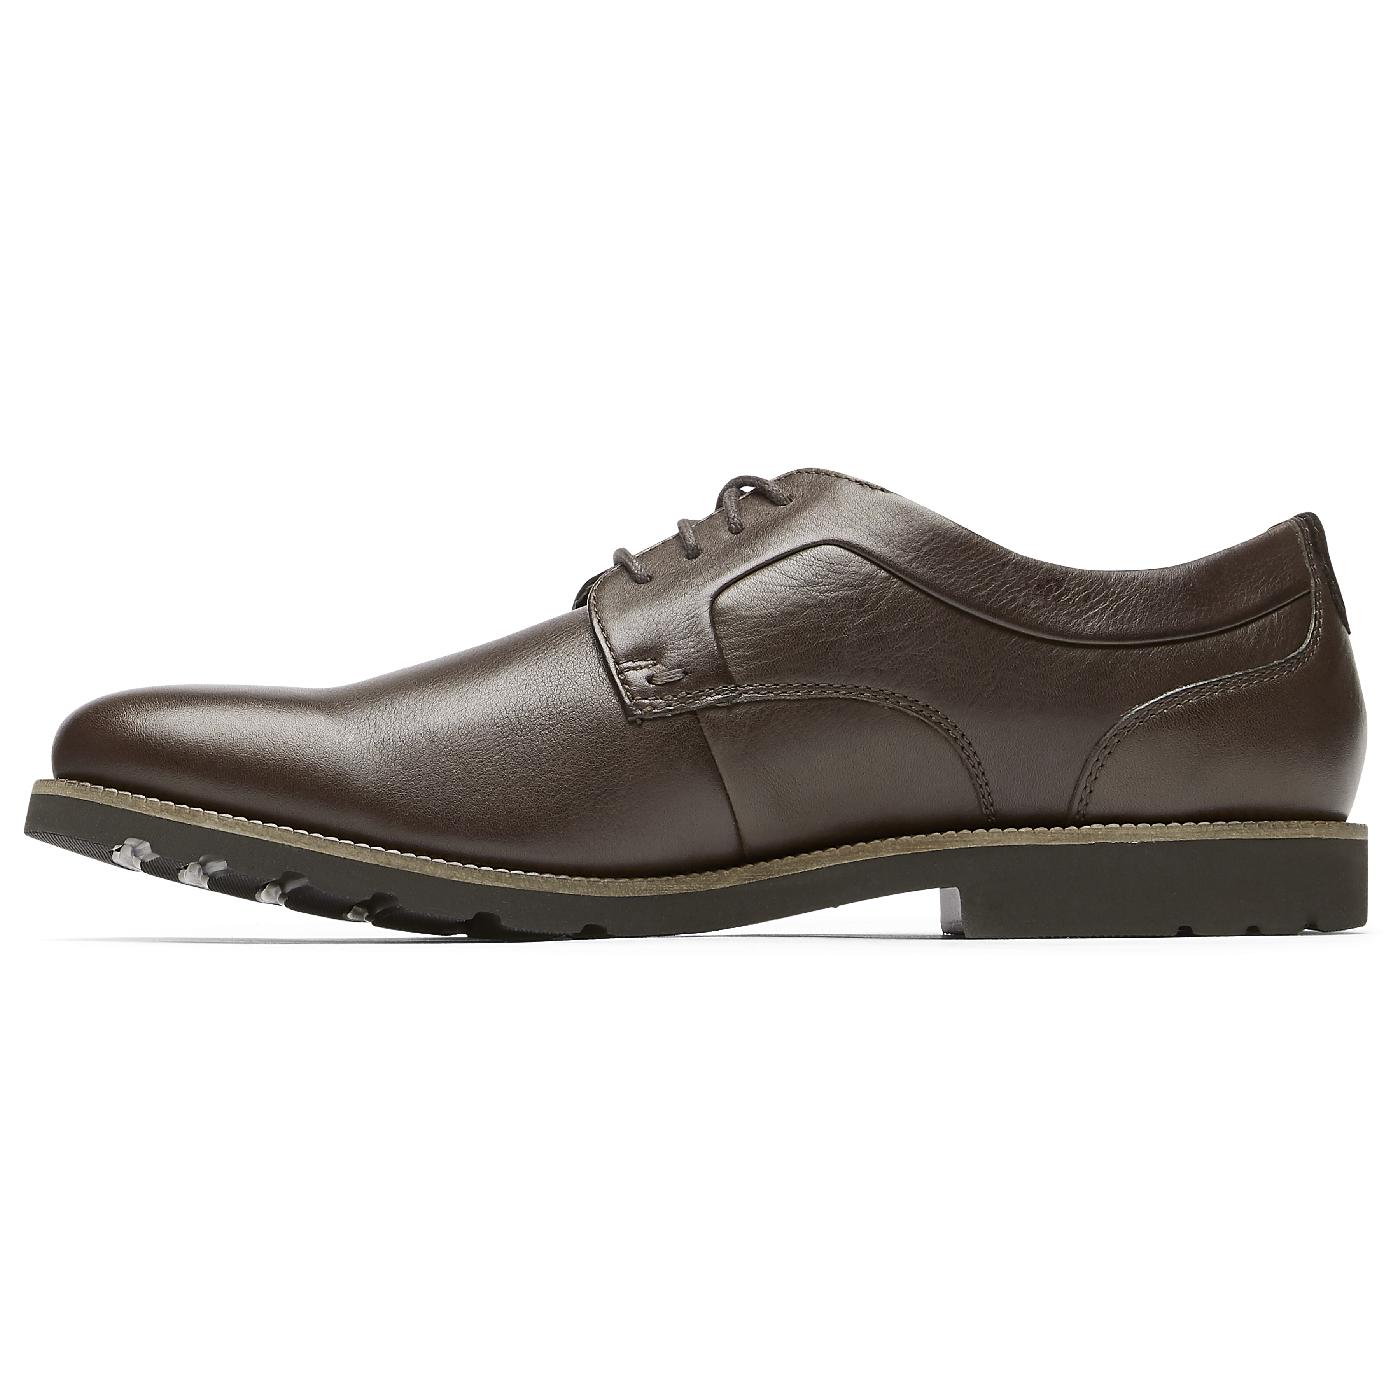 rockport men's sharp and ready colben oxford